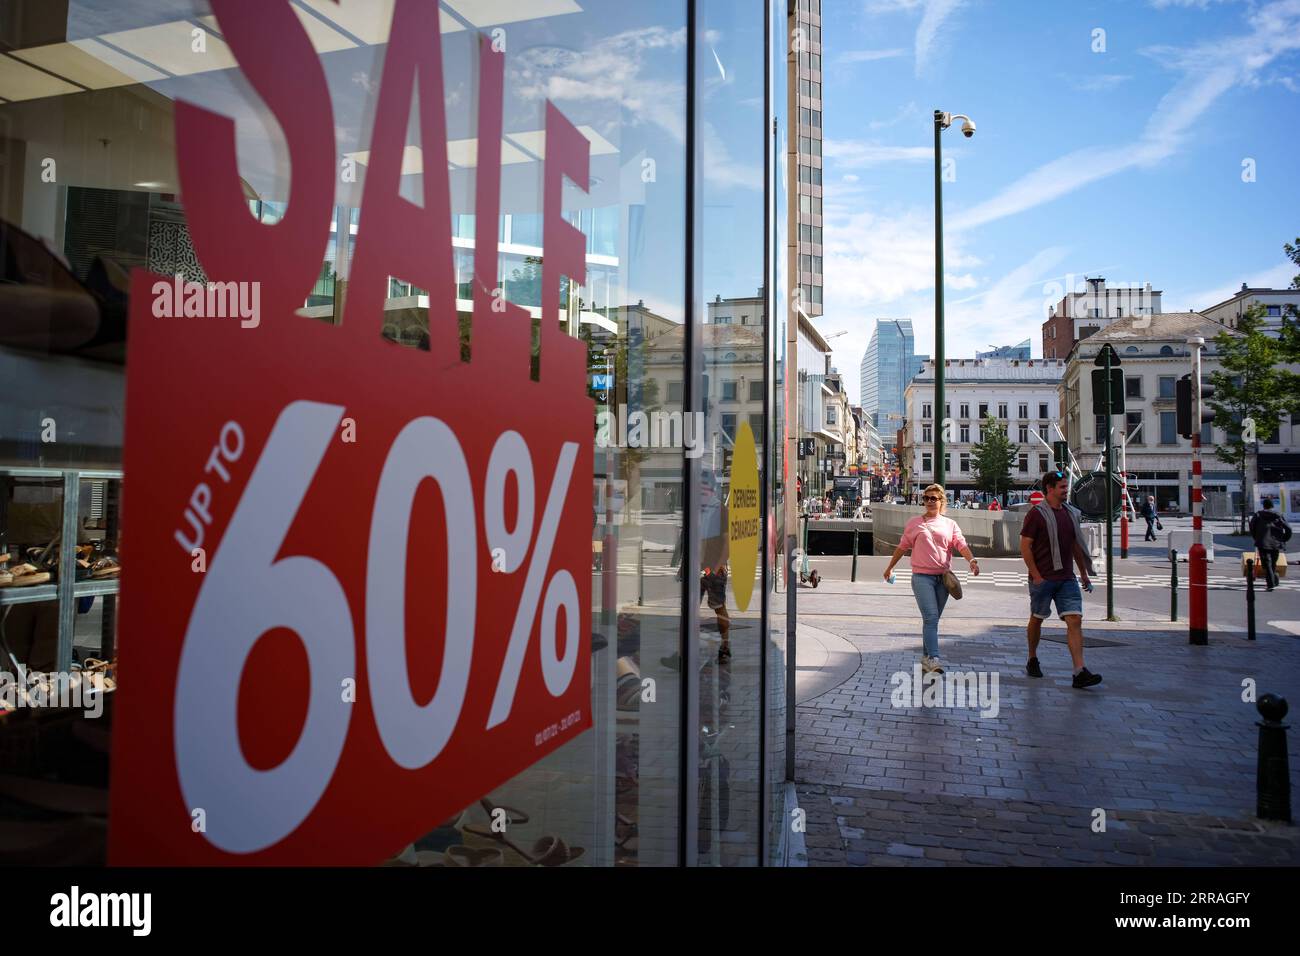 210730 -- BRUSSELS, July 30, 2021 -- A sign of sales discount is seen on the window of a shop in Brussels, Belgium, July 30, 2021. In the second quarter 2021, seasonally adjusted GDP increased by 2.0 percent in the euro area and by 1.9 percent in the EU, compared with the previous quarter, according to a preliminary flash estimate published by Eurostat, the statistical office of the European Union.  BELGIUM-BRUSSELS-EURO AREA-GDP GROWTH-2ND QUARTER ZhangxCheng PUBLICATIONxNOTxINxCHN Stock Photo